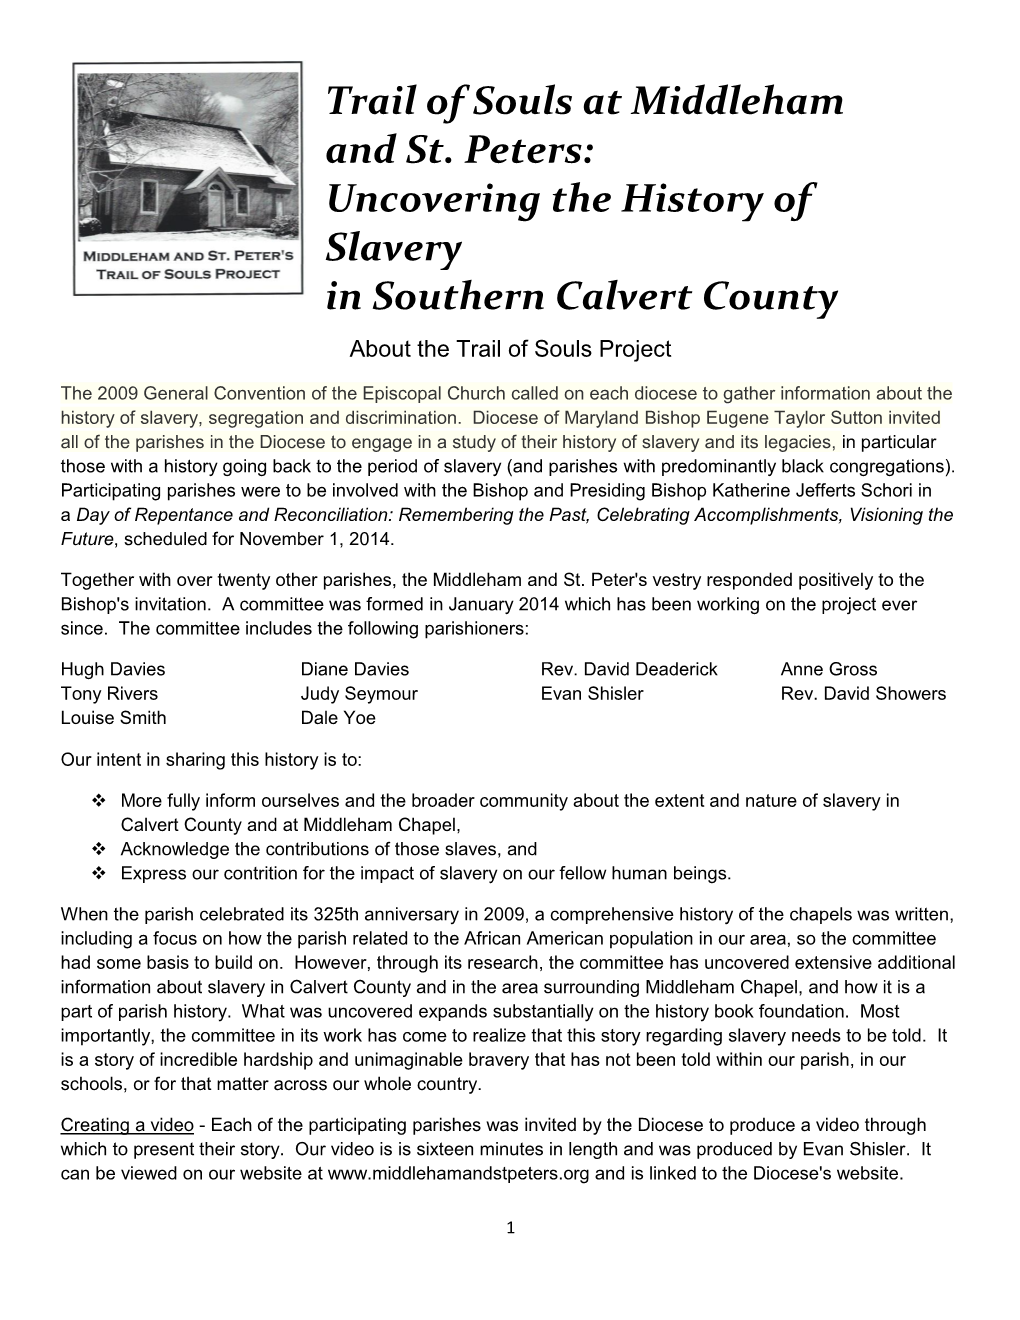 Trail of Souls at Middleham and St. Peters: Uncovering the History of Slavery in Southern Calvert County